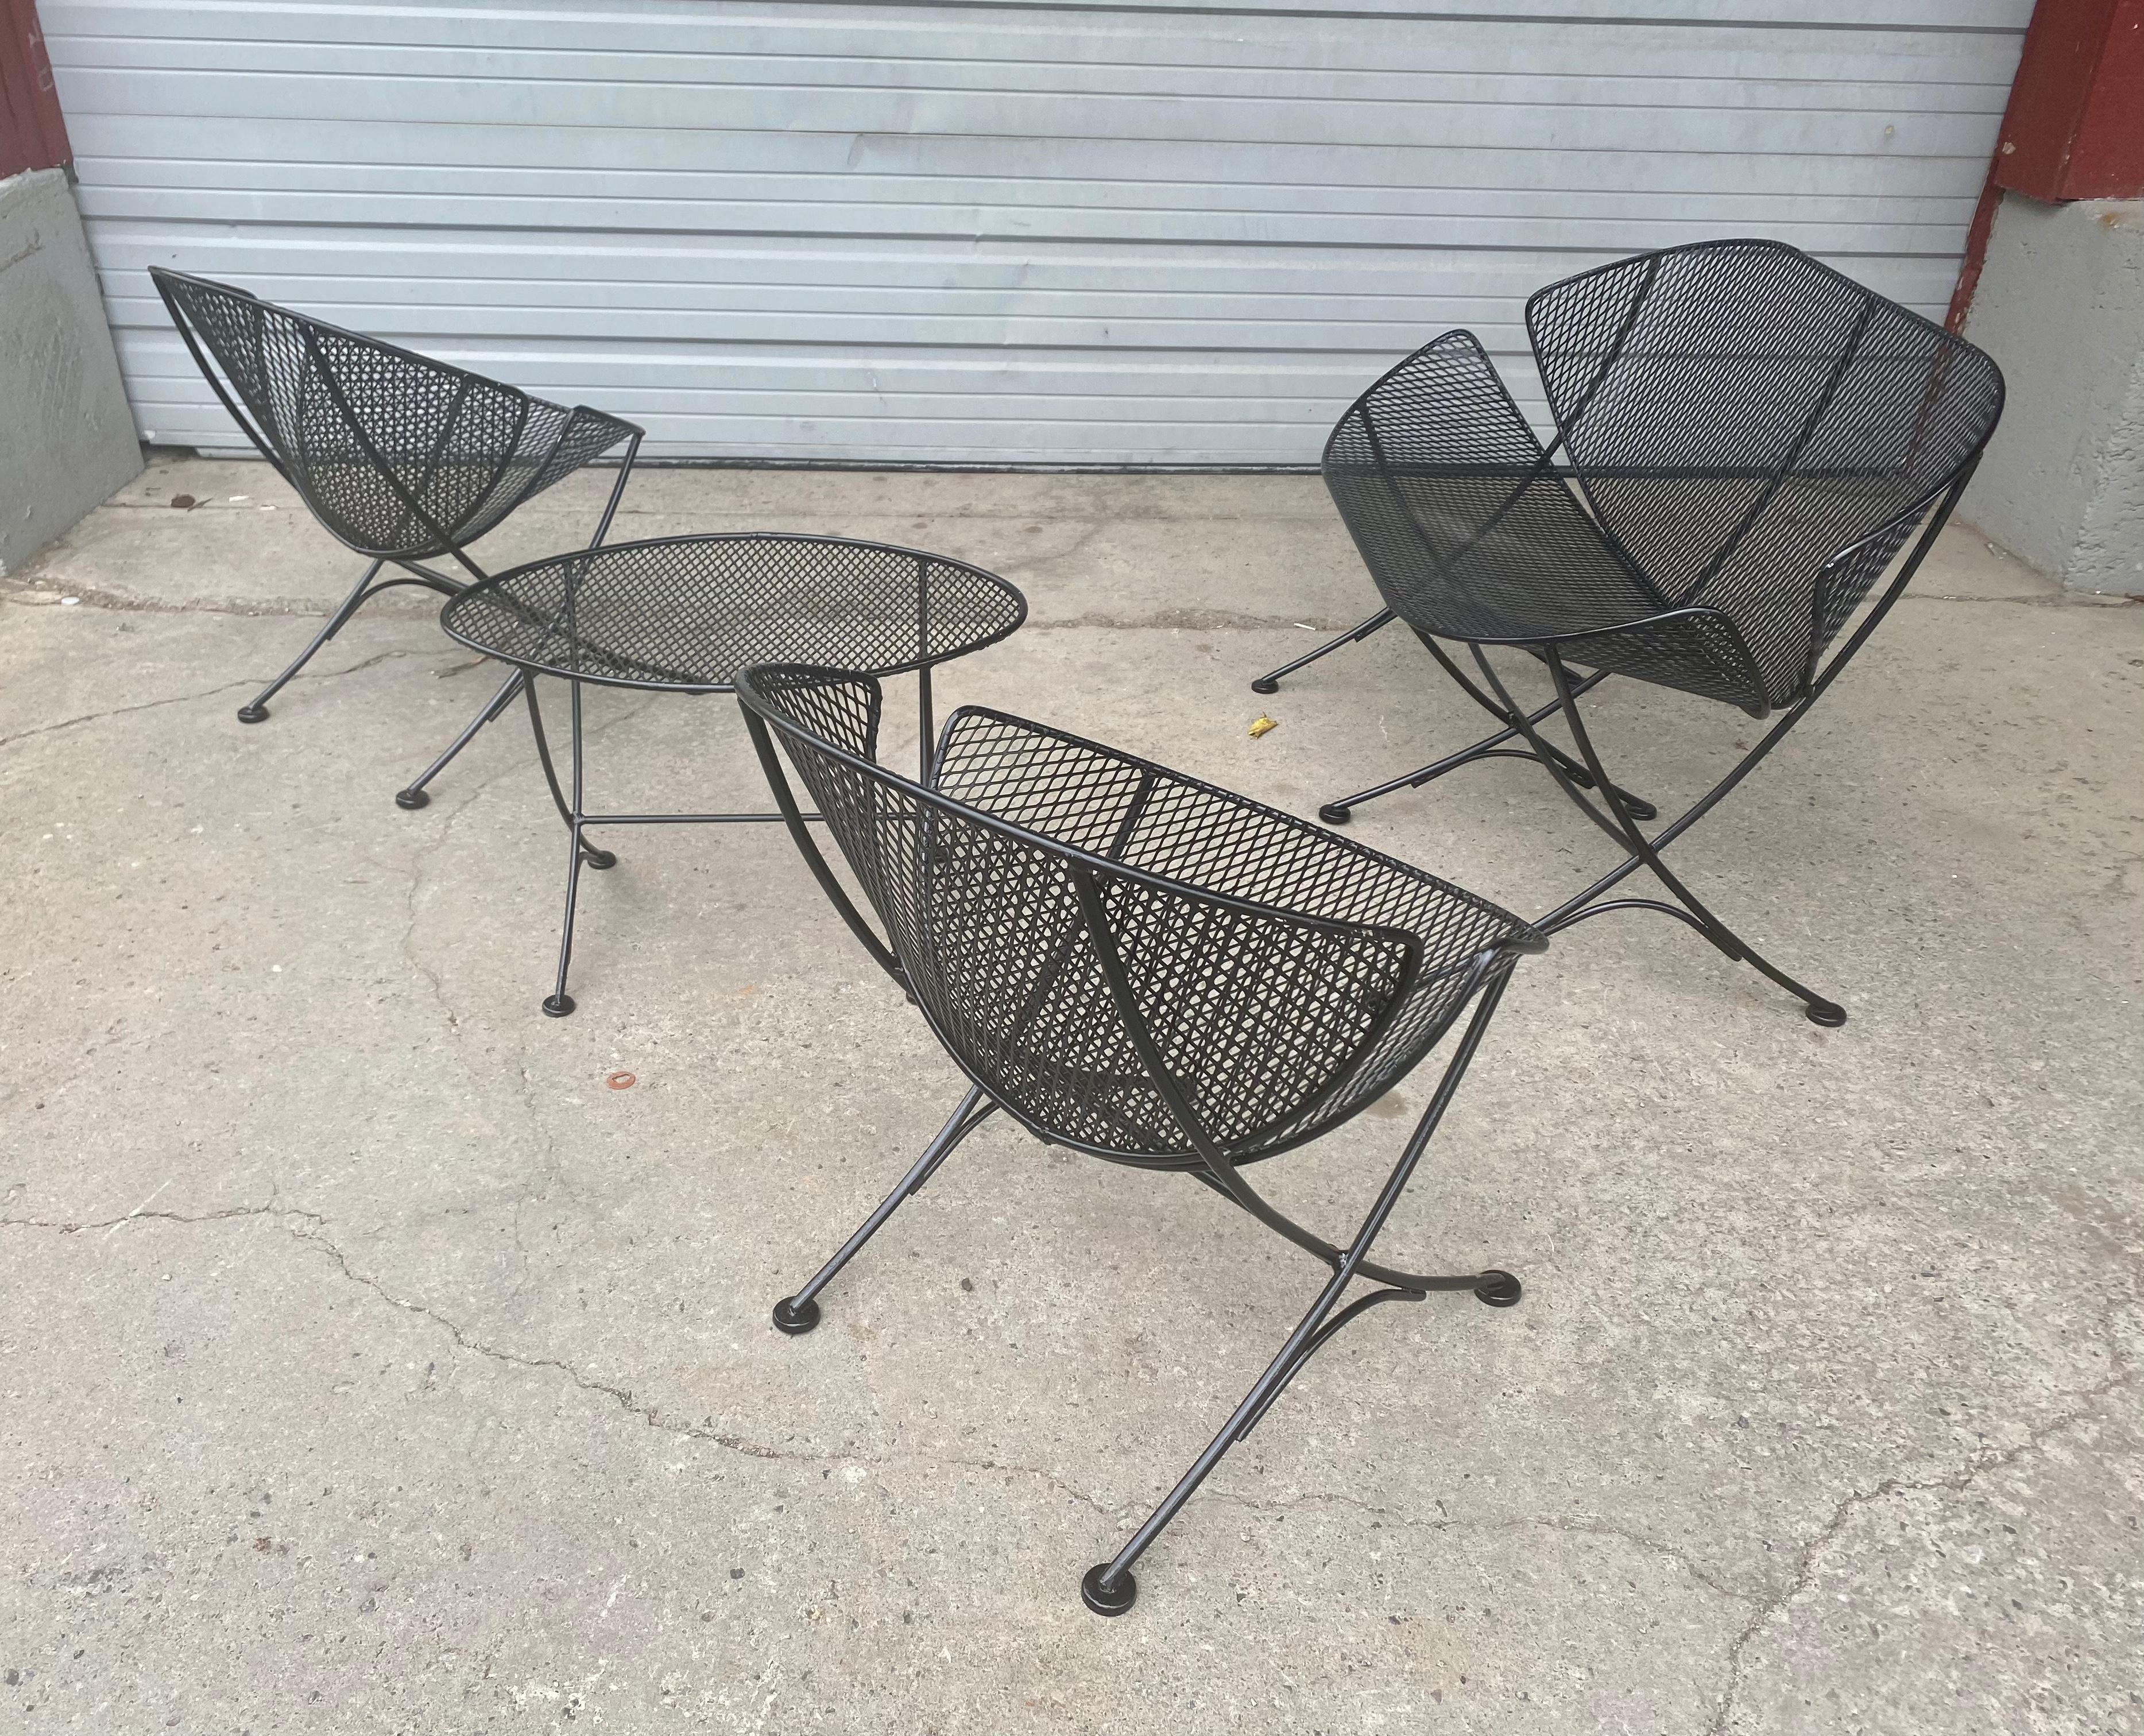 Rare four-piece set of Maurizio Tempestini clam shell set 2 chairs, settee and table Produced by Salternini in the 1950s classic modernist design. Extremely comfortable, Hand delivery avail to New York City or anywhere en route from Buffalo NY. The